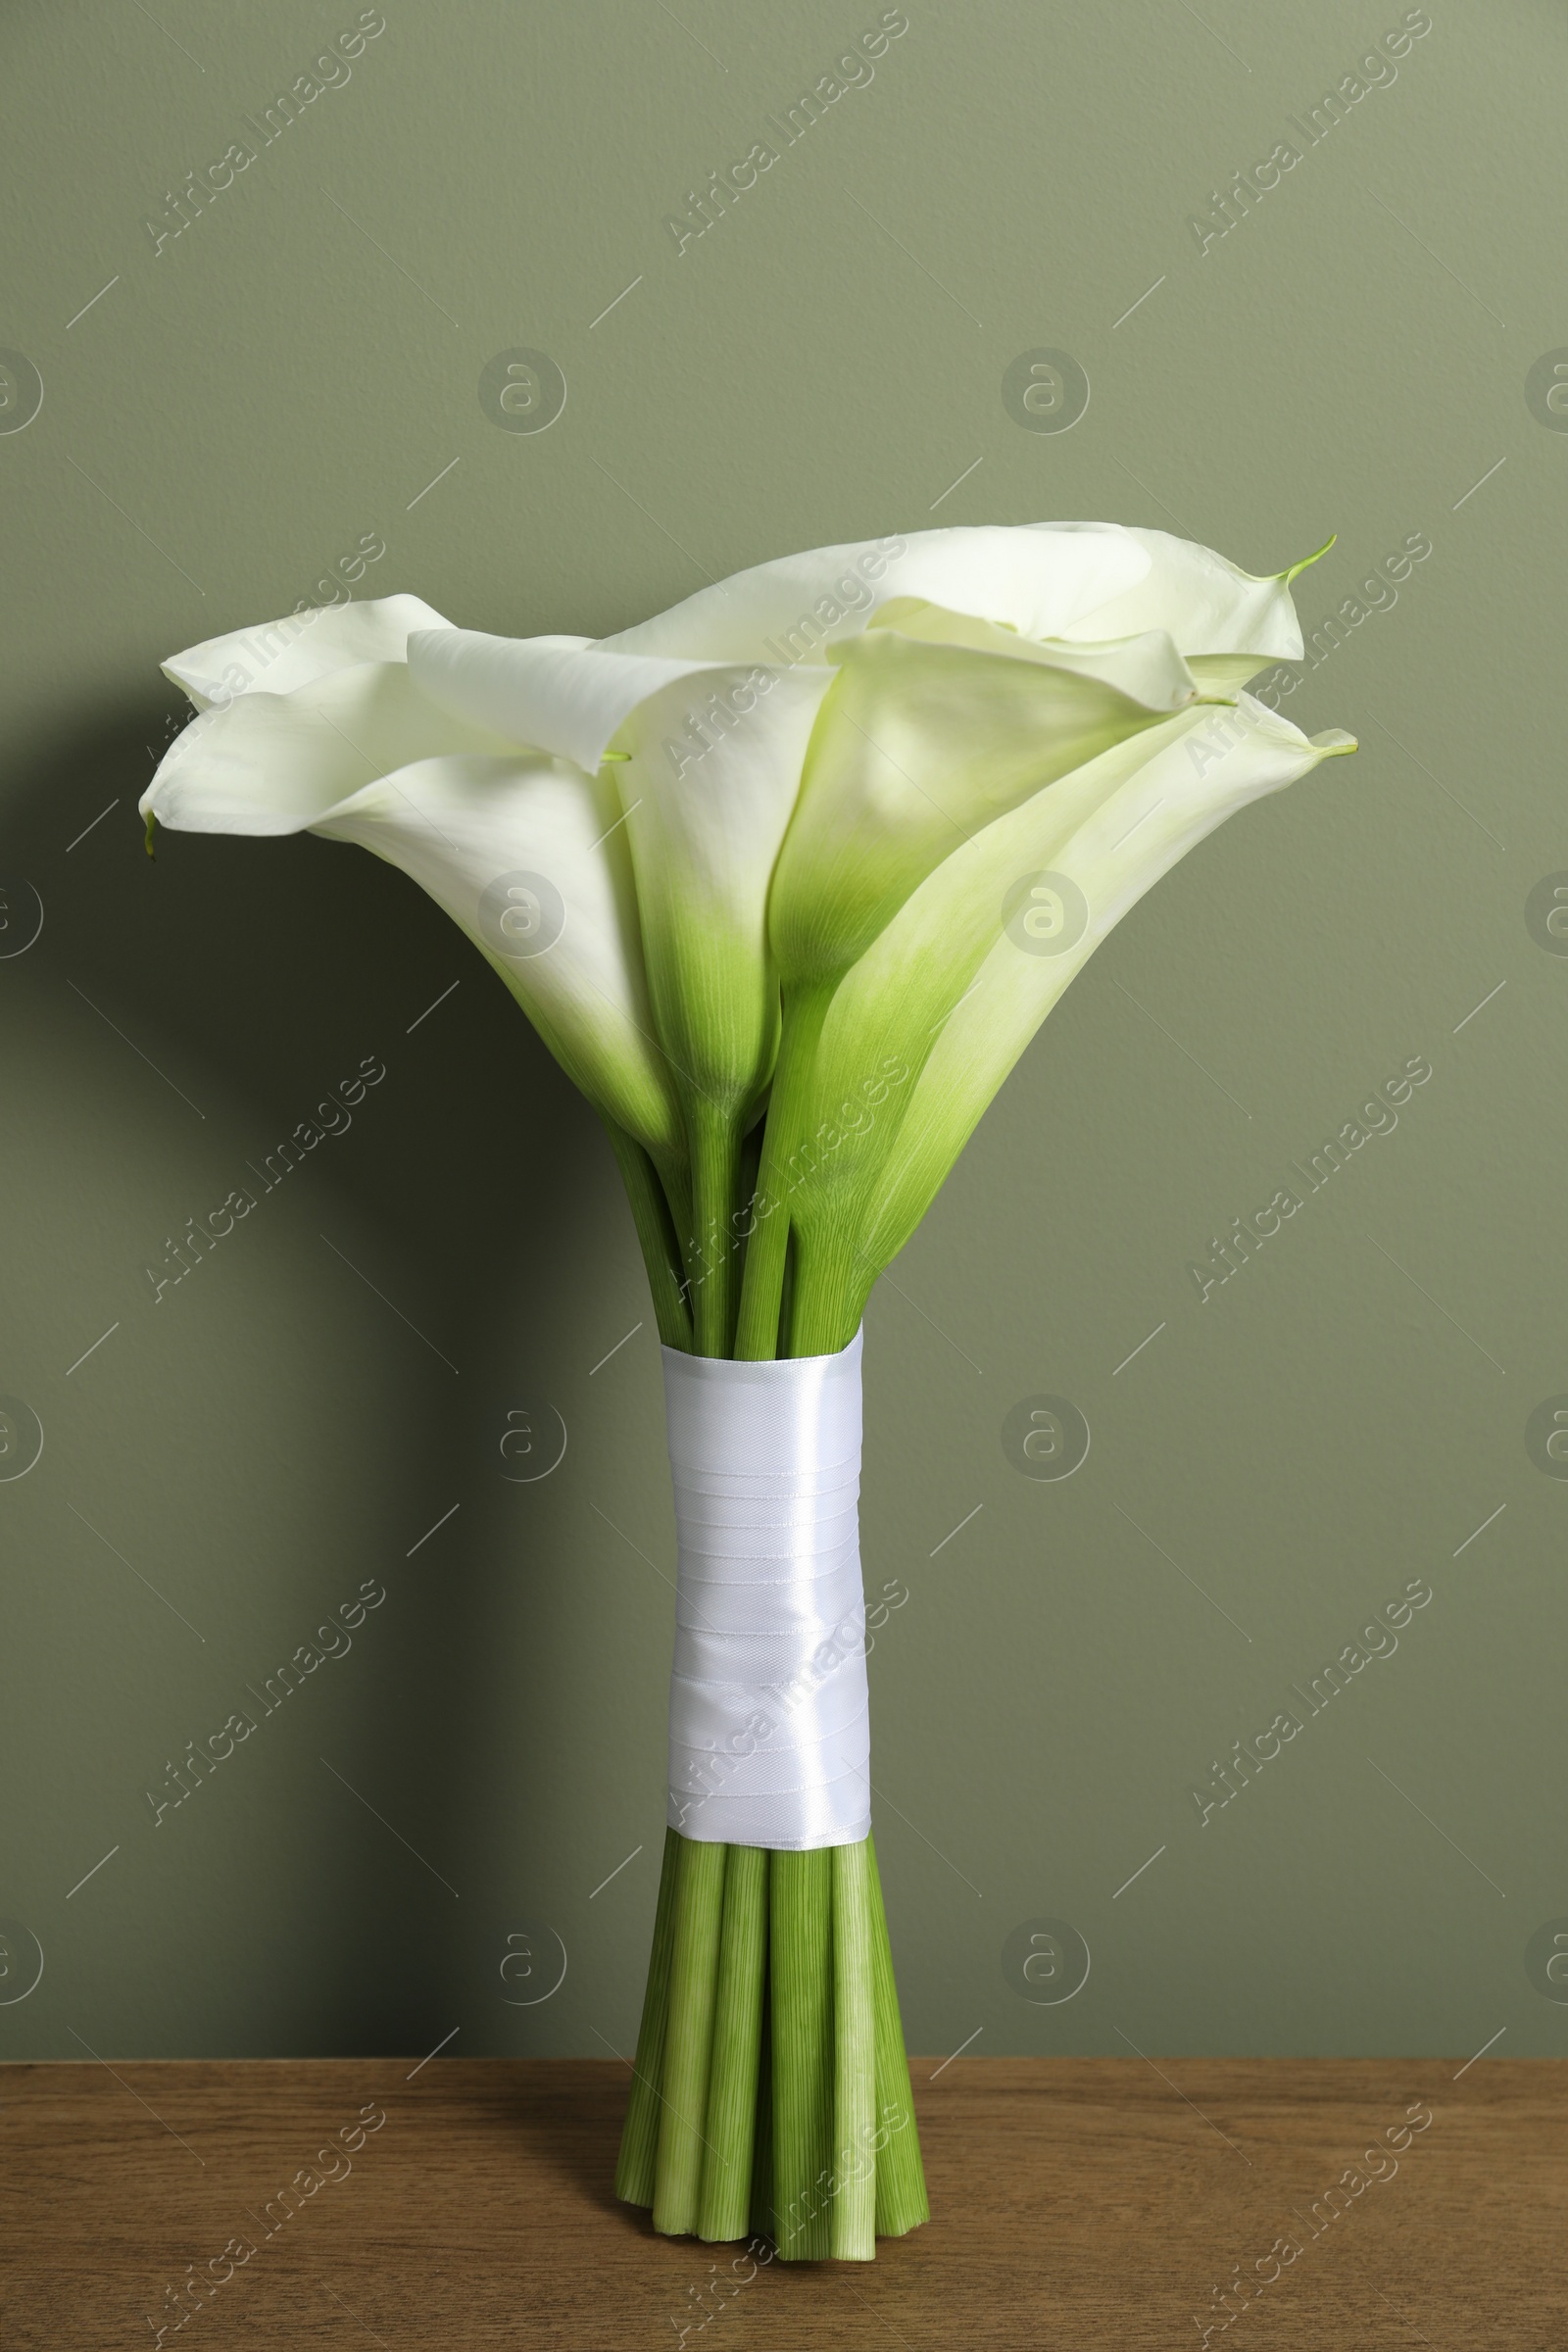 Photo of Beautiful calla lily flowers tied with ribbon on wooden table near olive wall